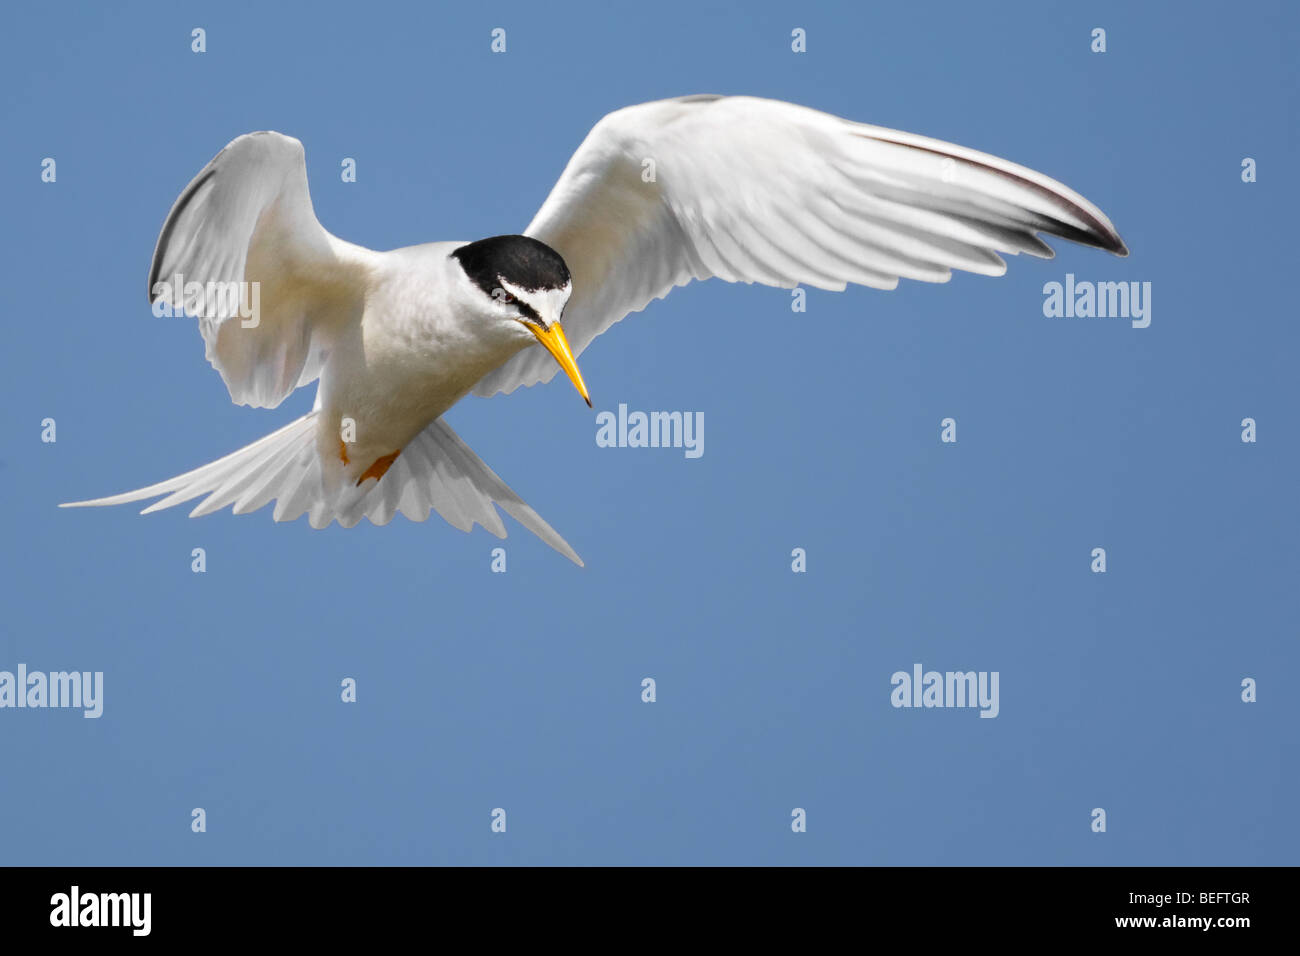 Little tern hovering against a clear blue sky, Stock Photo